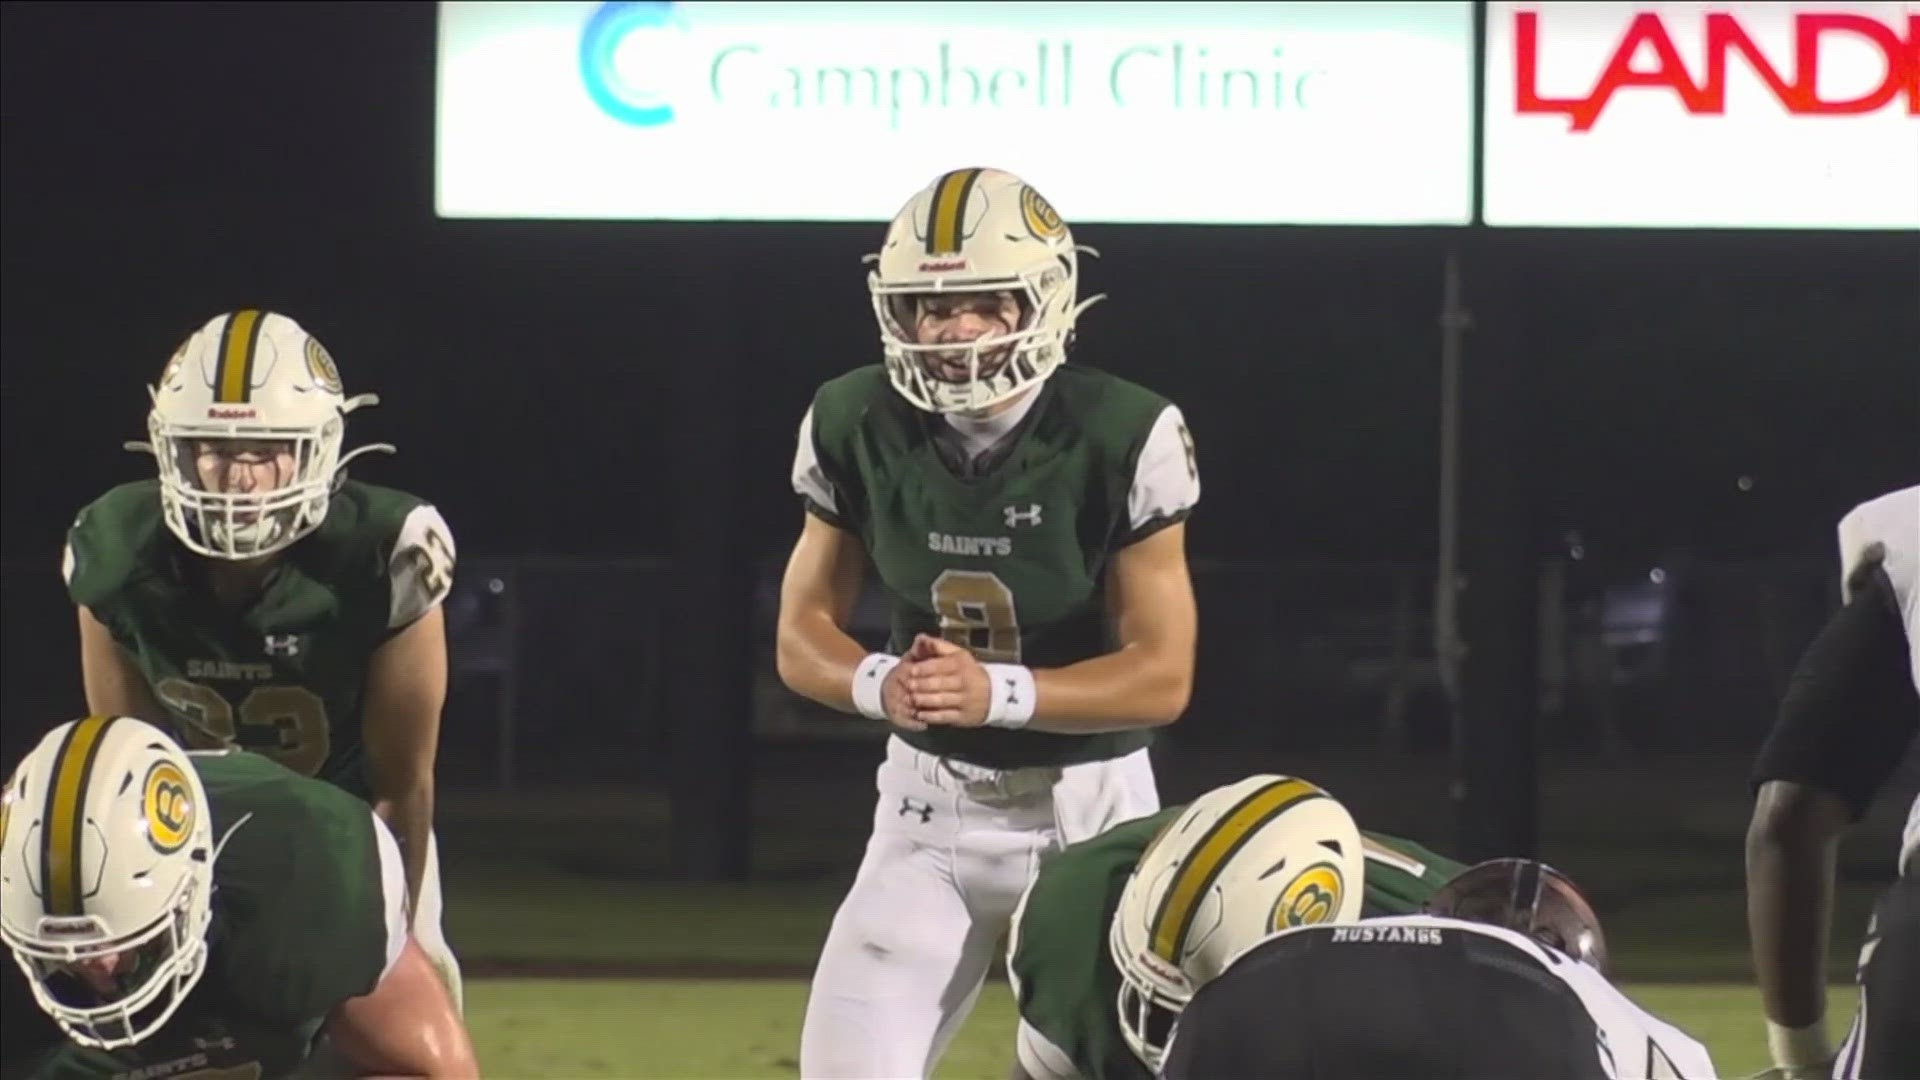 Caleb Hilliard gives us the rundown on the latest high school football matches in the 901.